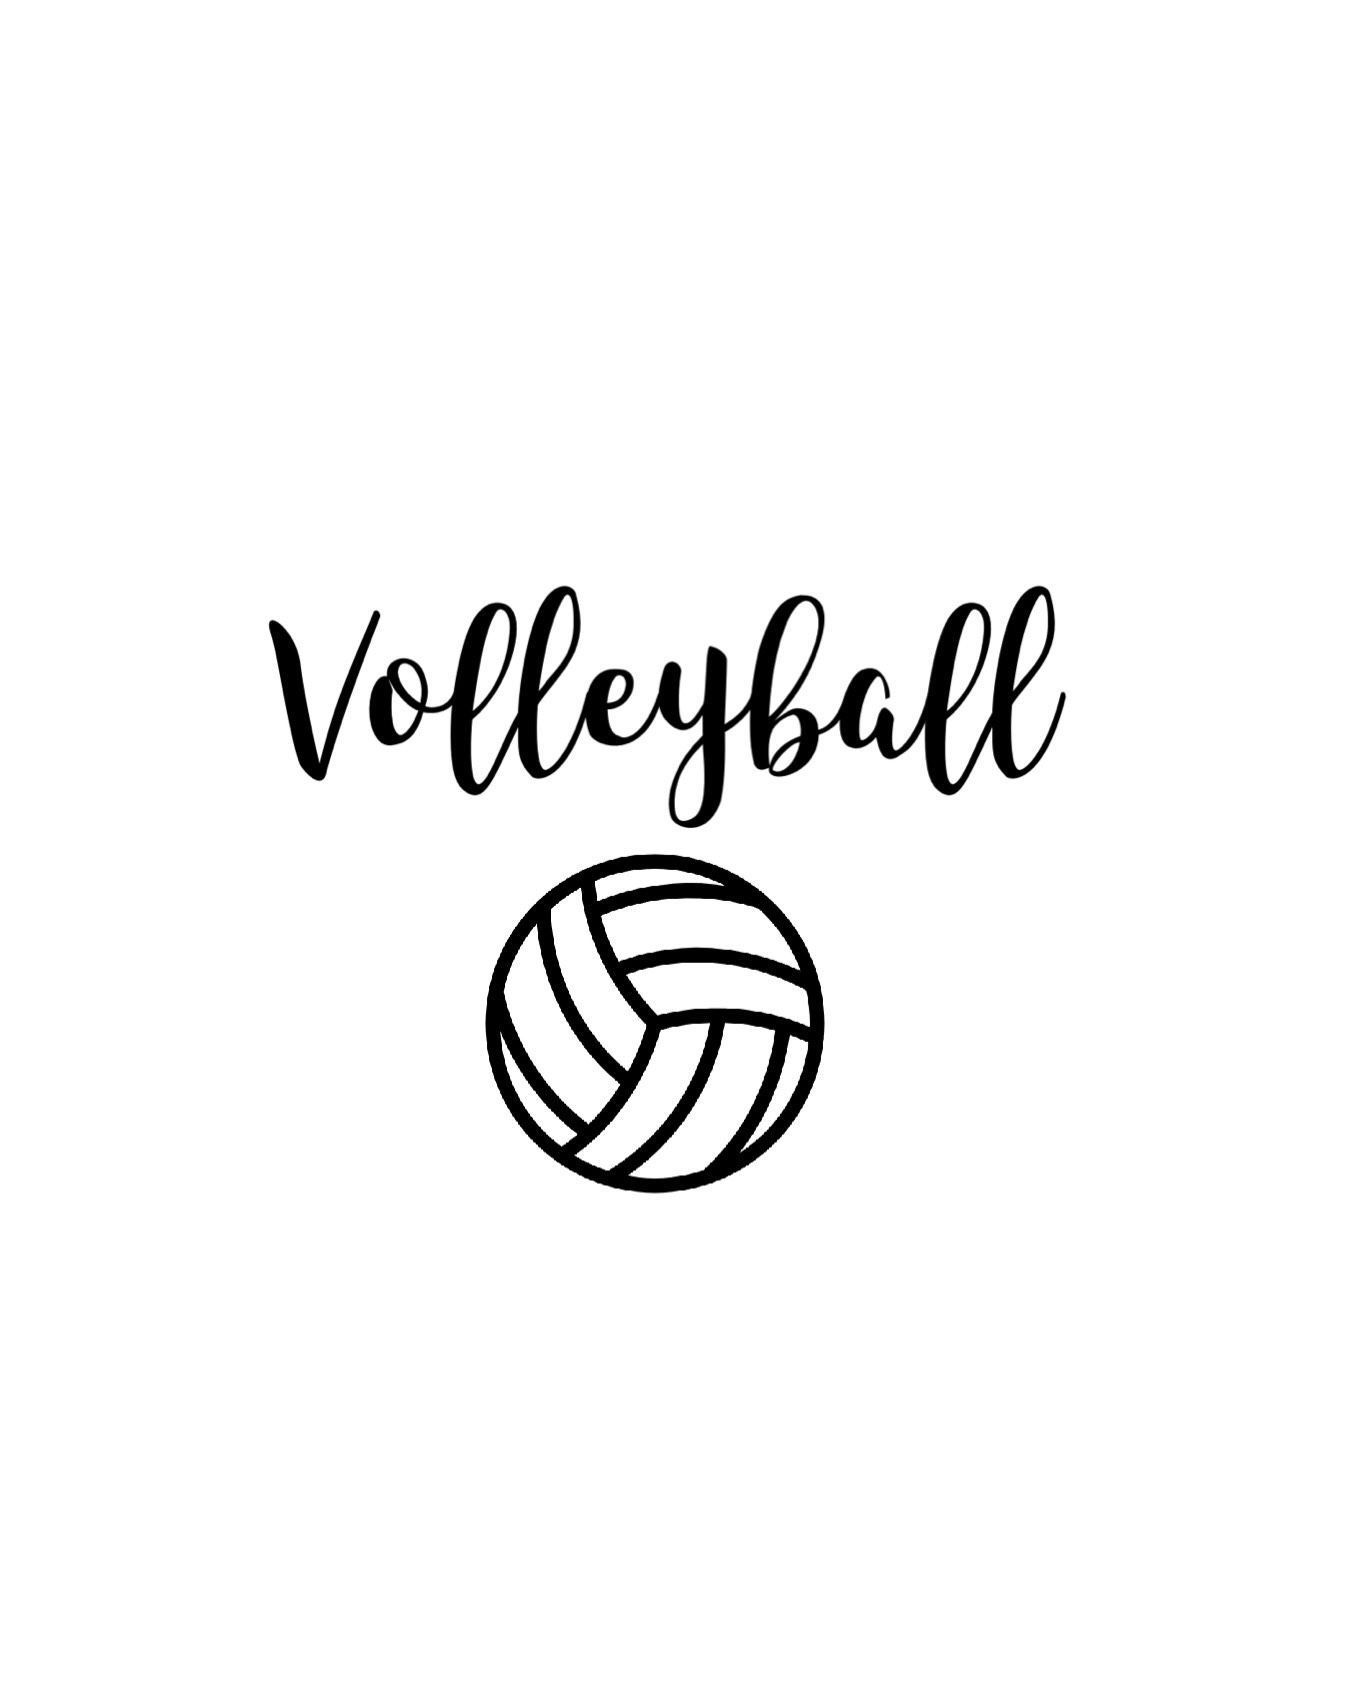 Volleyball Quotes Wallpaper Free Volleyball Quotes Background